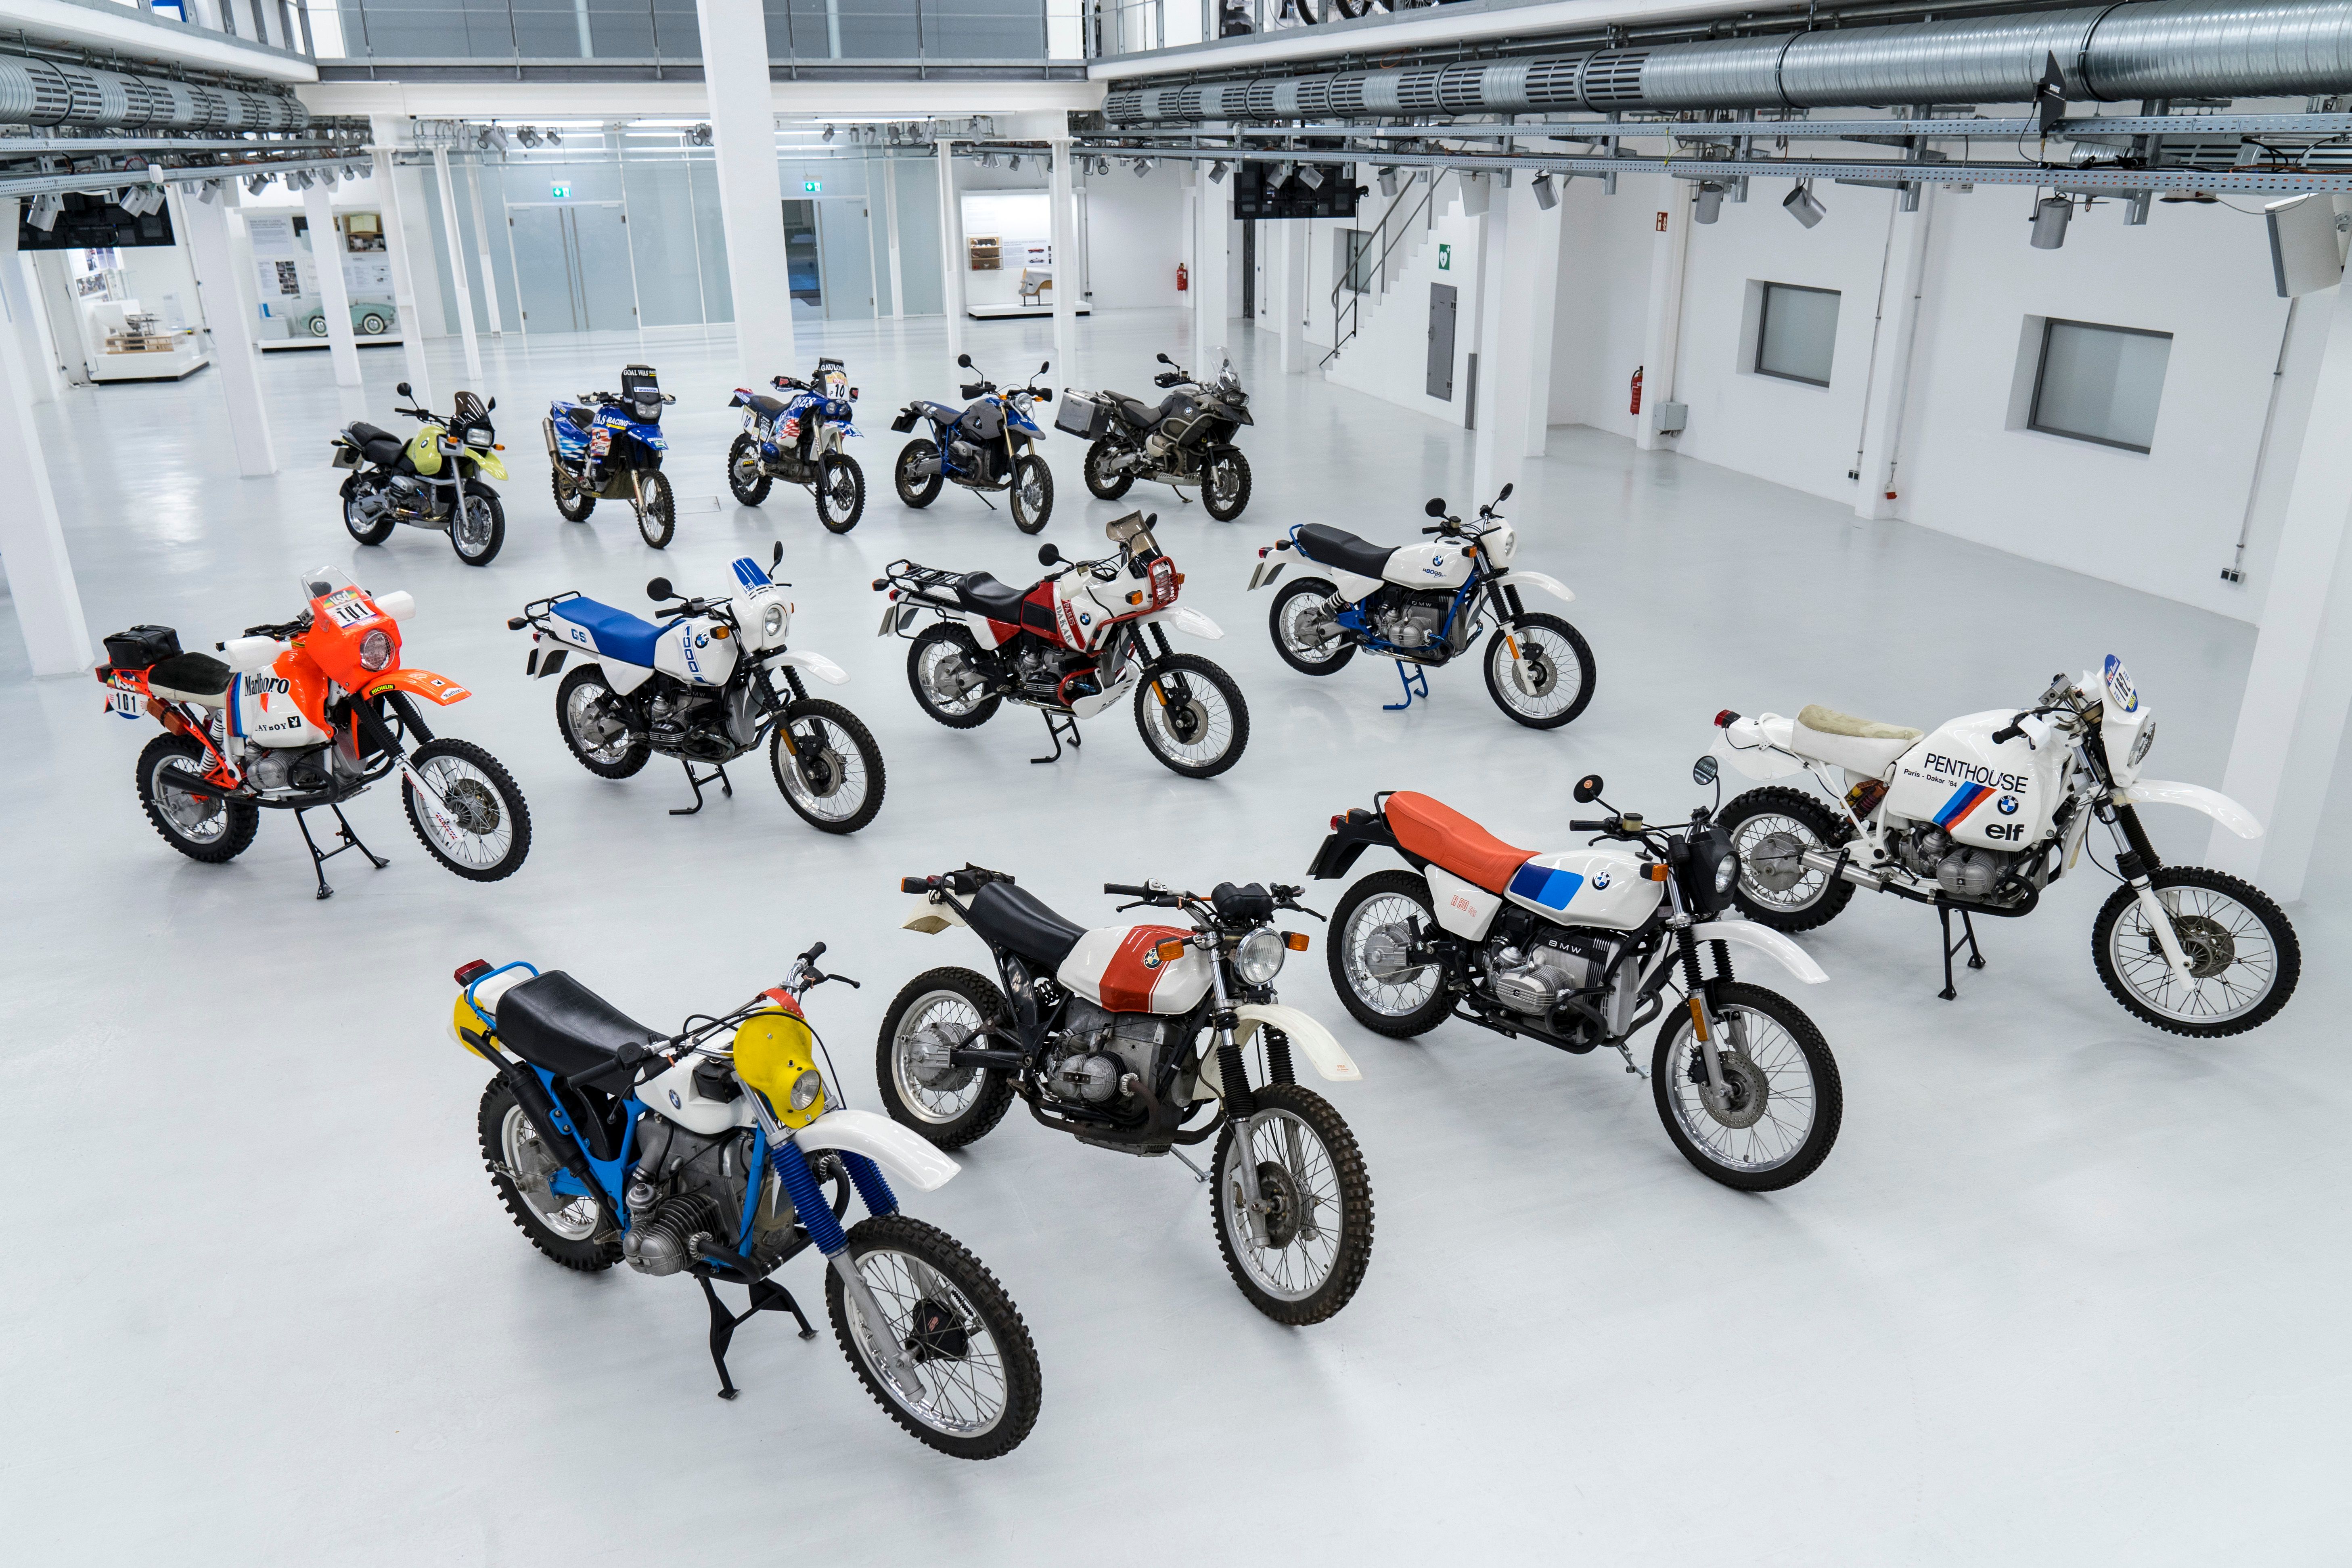 BMW GS historic lineup 40 years